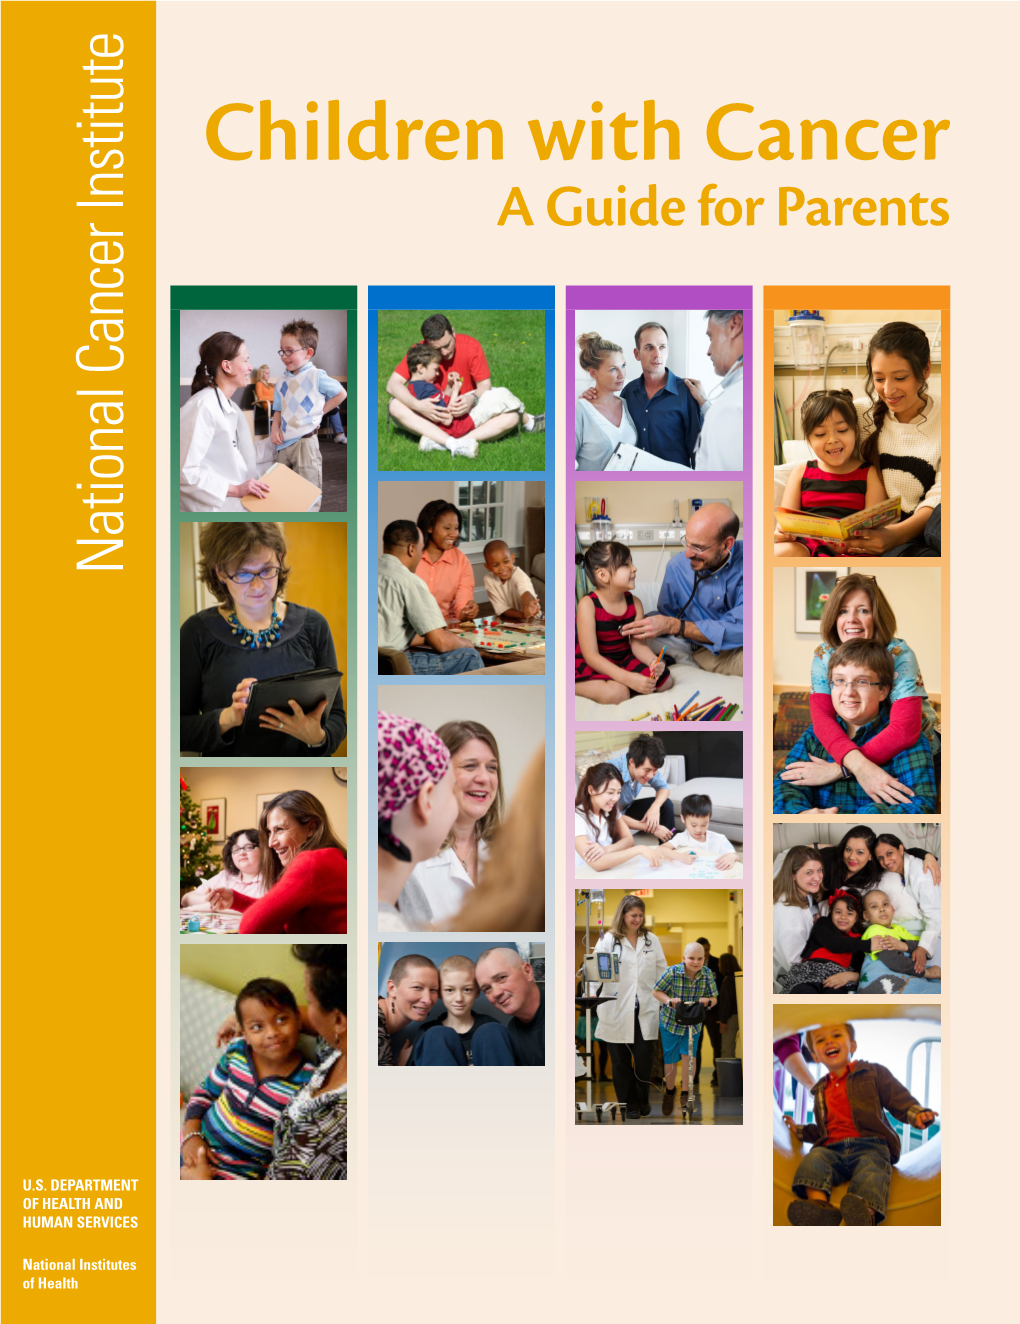 Children with Cancer: a Guide for Parents